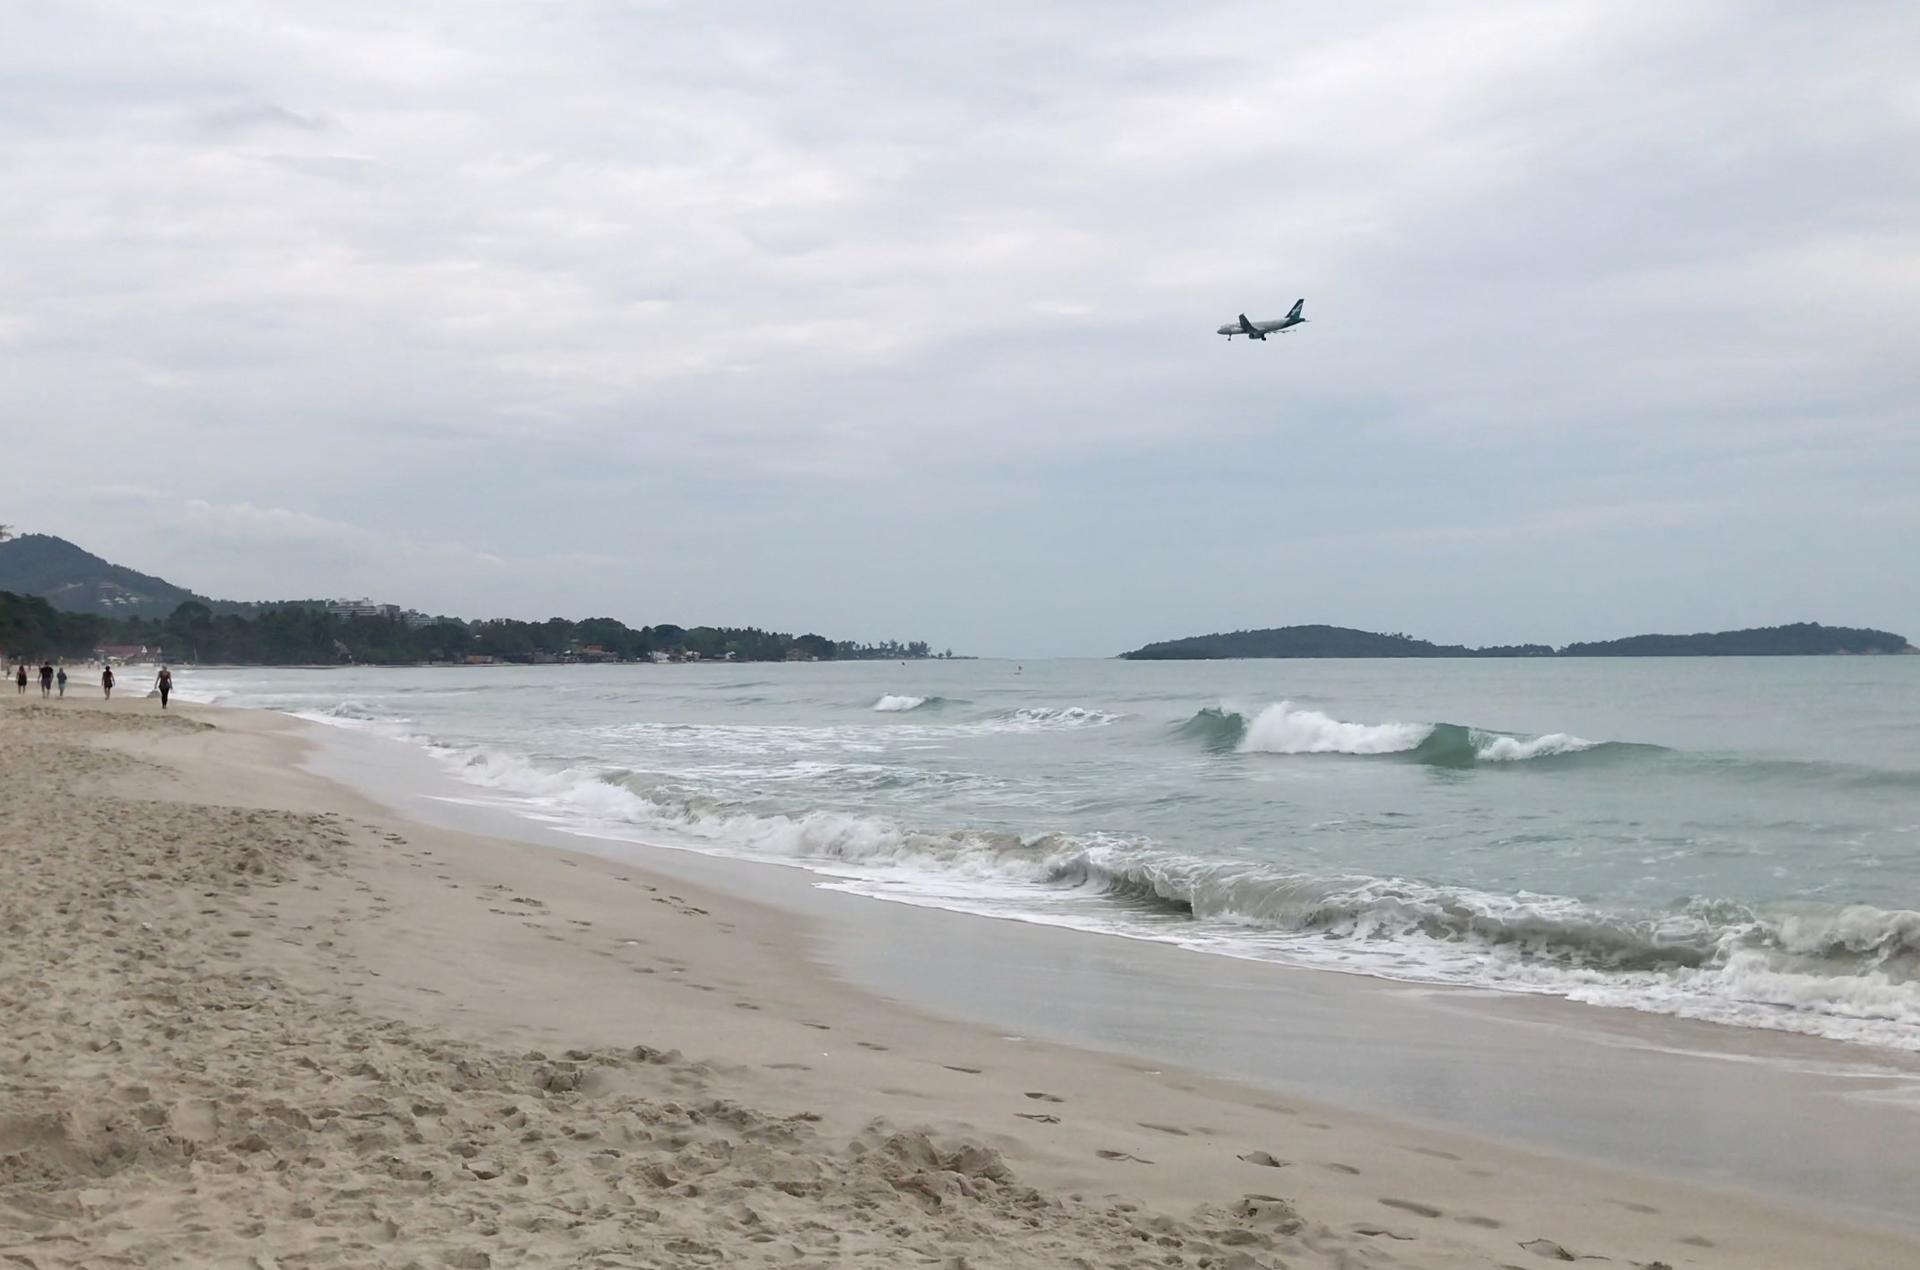 A commercial plane flies over a beach on Koh Samui island in Thailand's Surat Thani province, January 3, 2019. EFE/ Sitthipong Chareonjai/FILE